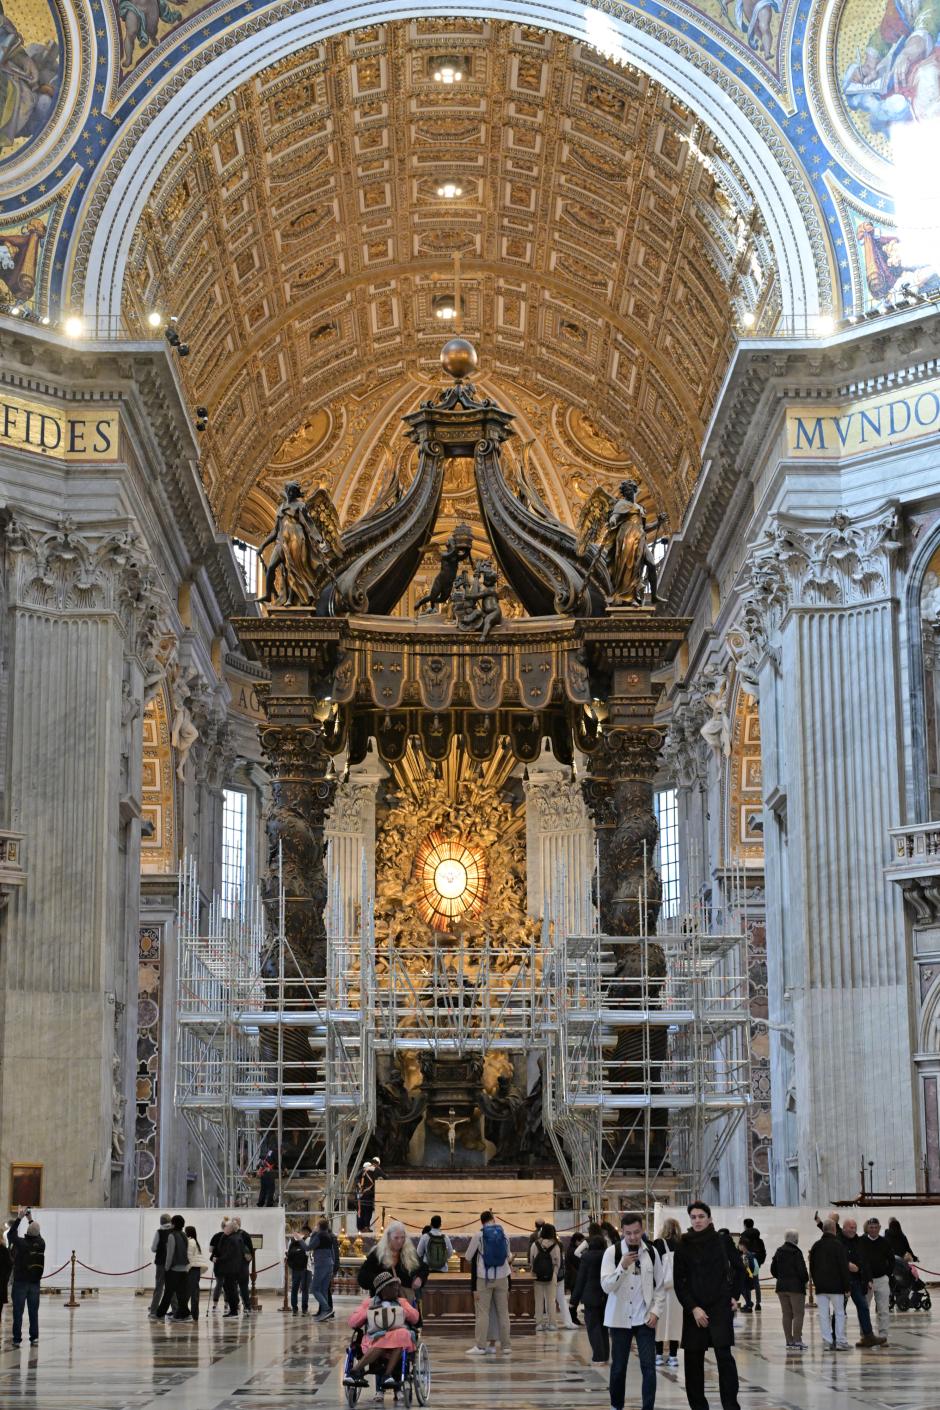 Workers mount a scaffolding around the baldachin of St. Peter's basilica to start its restoration on February 21, 2024 in the Vatican. The large Baroque sculpted bronze canopy over the high altar of St. Peter's Basilica by artist Gian Lorenzo Bernini dated from 1634. (Photo by Andreas SOLARO / AFP)